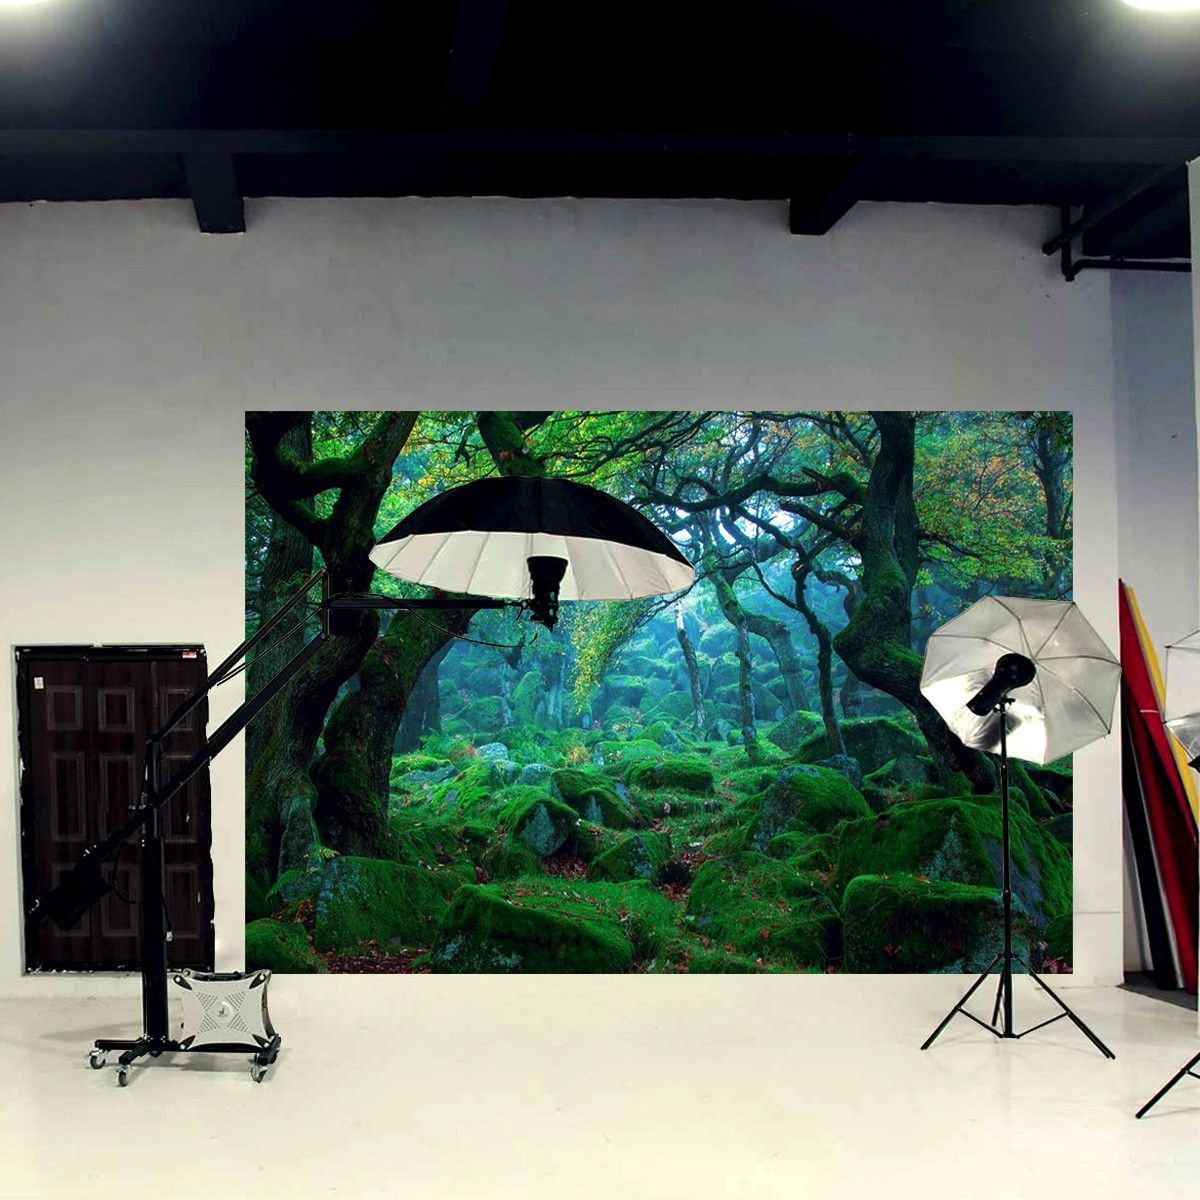 210x150cm-Natural-Forest-Jungle-Photography-Background-Studio-Backdrop-Photo-Props-Wall-Hanging-Tape-1717692